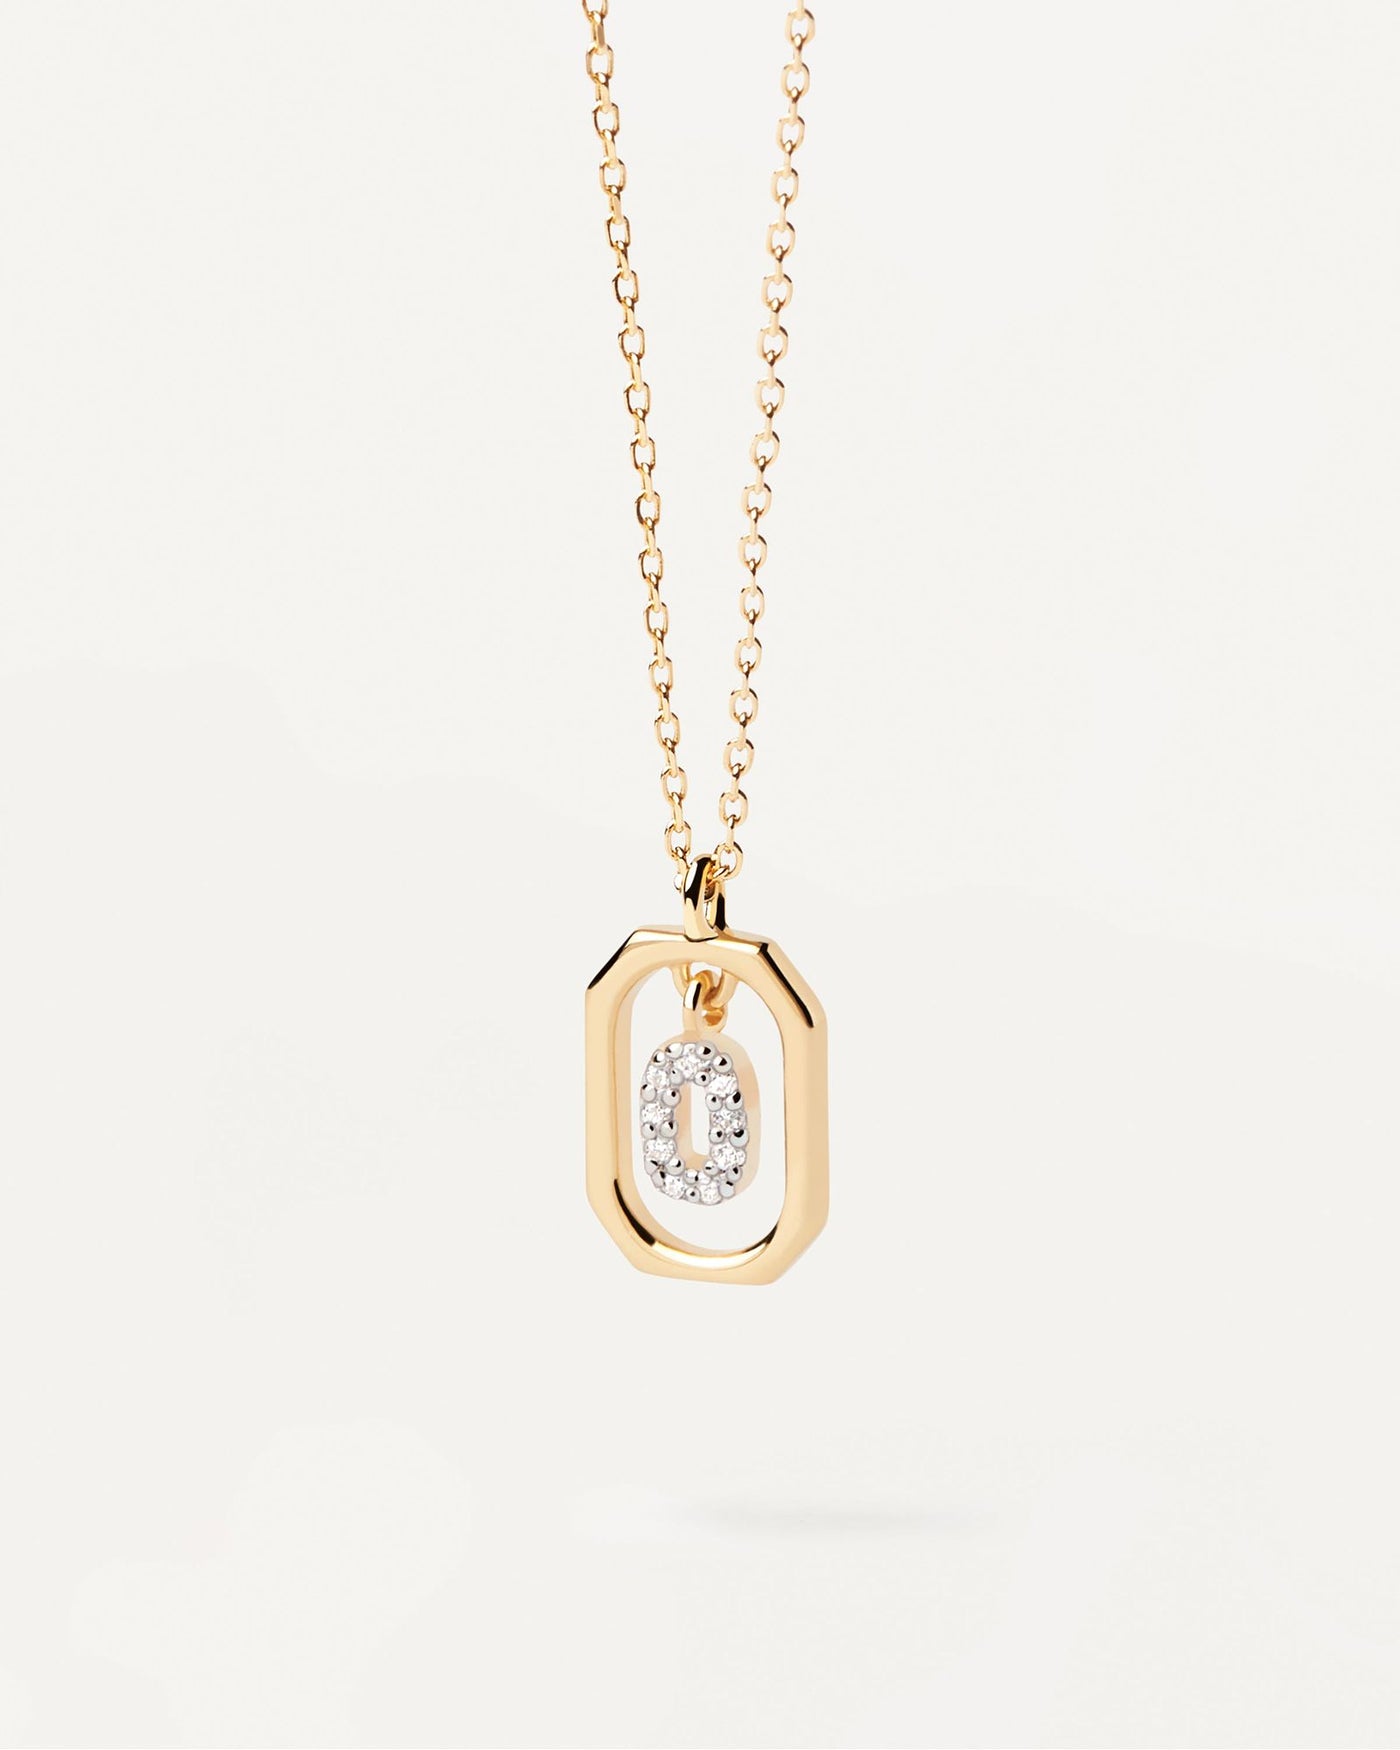 2024 Selection | Mini Letter O Necklace. Small initial O necklace in zirconia inside gold-plated silver octagonal pendant. Get the latest arrival from PDPAOLA. Place your order safely and get this Best Seller. Free Shipping.